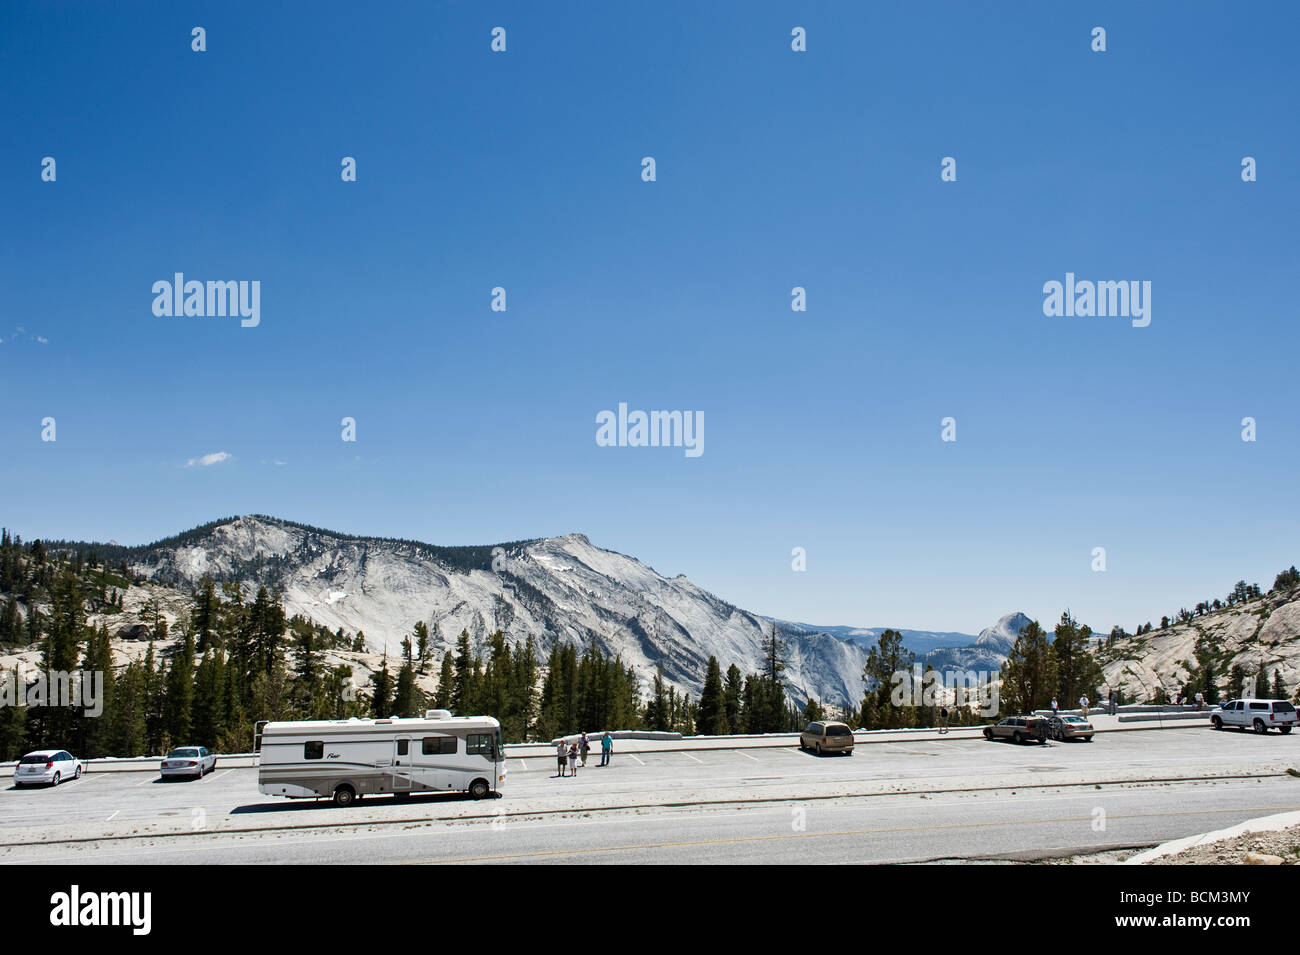 Parking lot and viewing area at Olmsted point, Yosemite national park, California Stock Photo